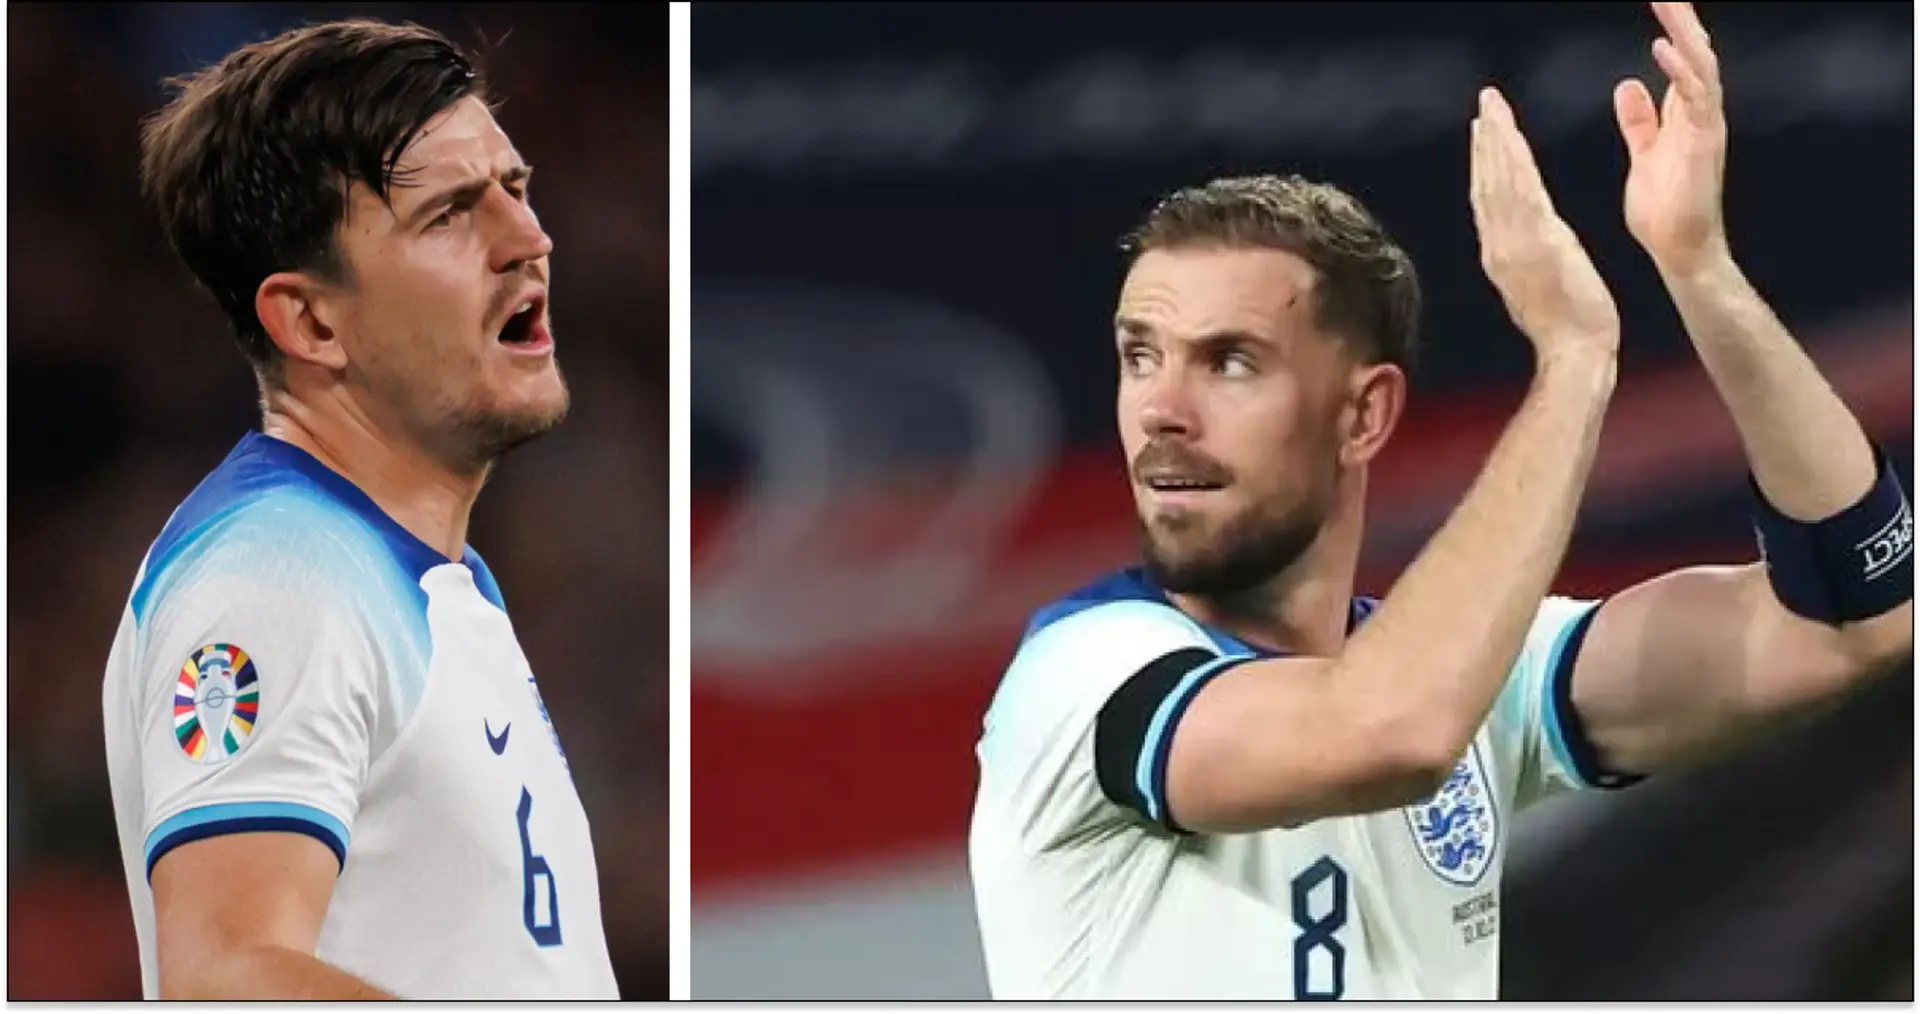 'Not real fans': Maguire defends Henderson after England boos